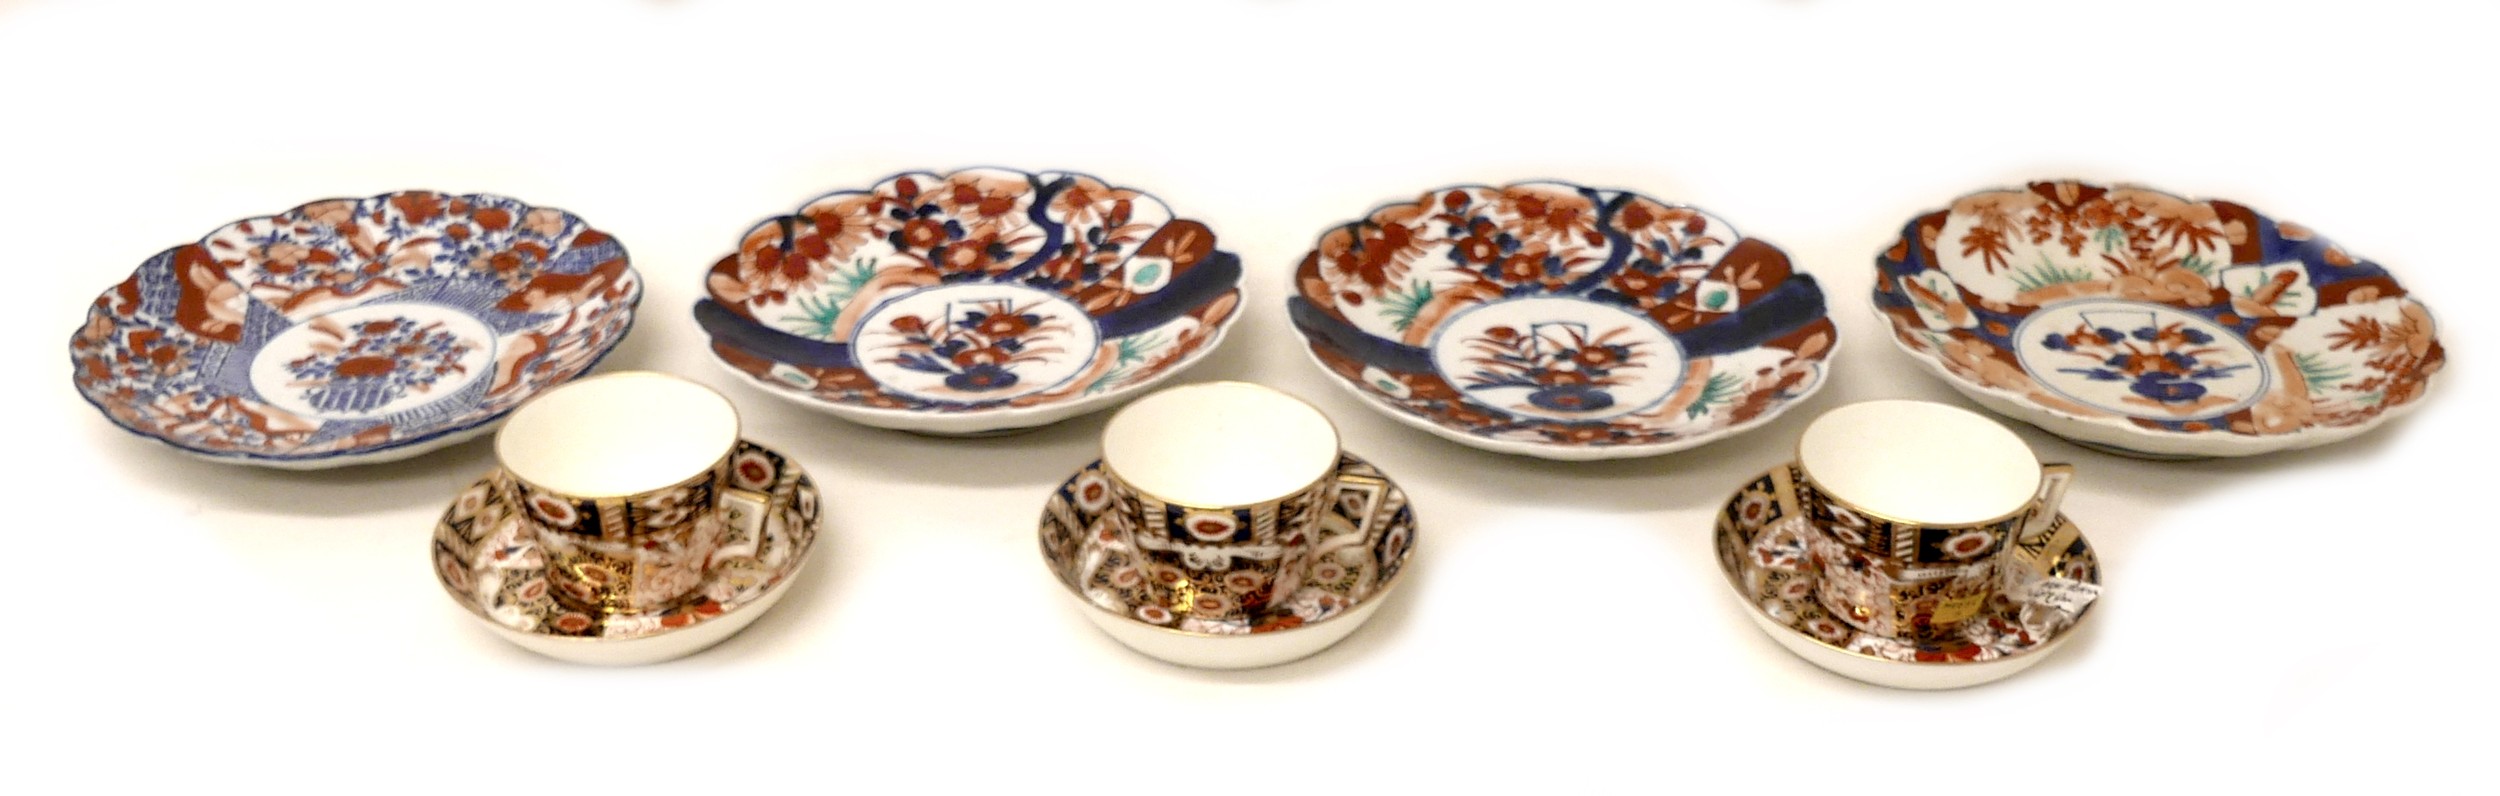 A group of four Japanese 19th century plates, decorated in the Imari palette, with scalloped rims, - Image 2 of 3